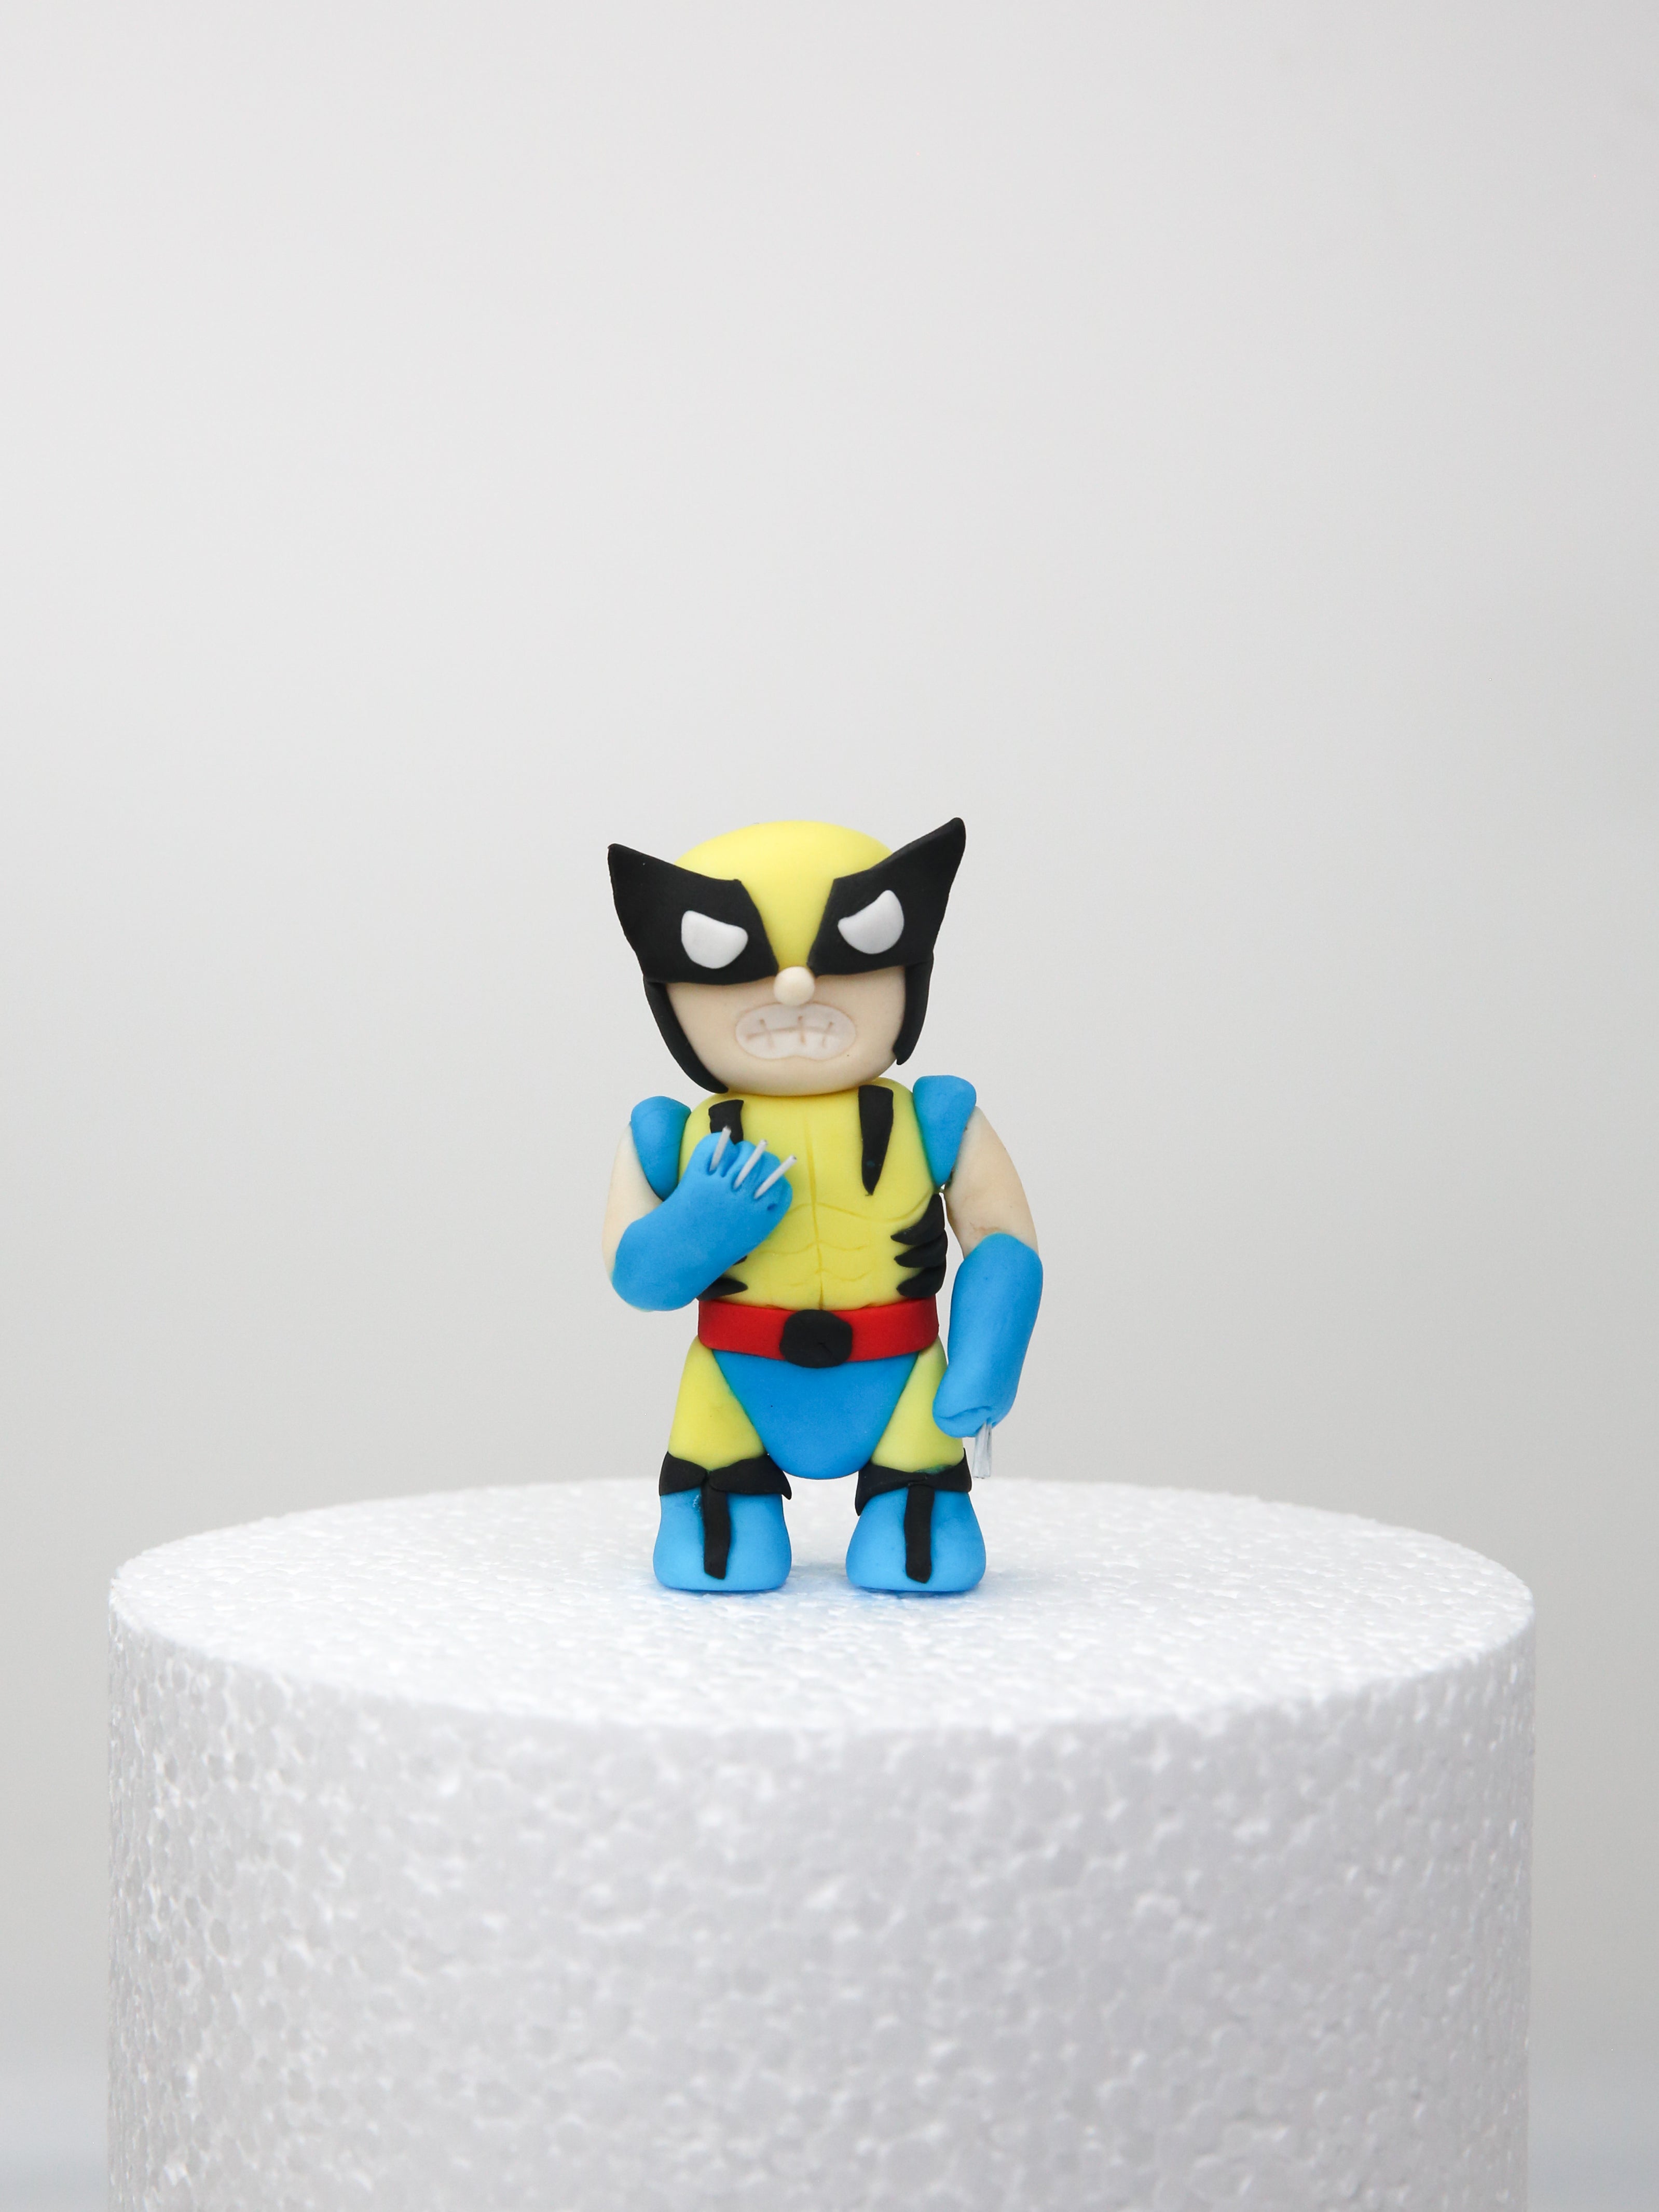 Wonderful Wolverine Cake - Between The Pages Blog